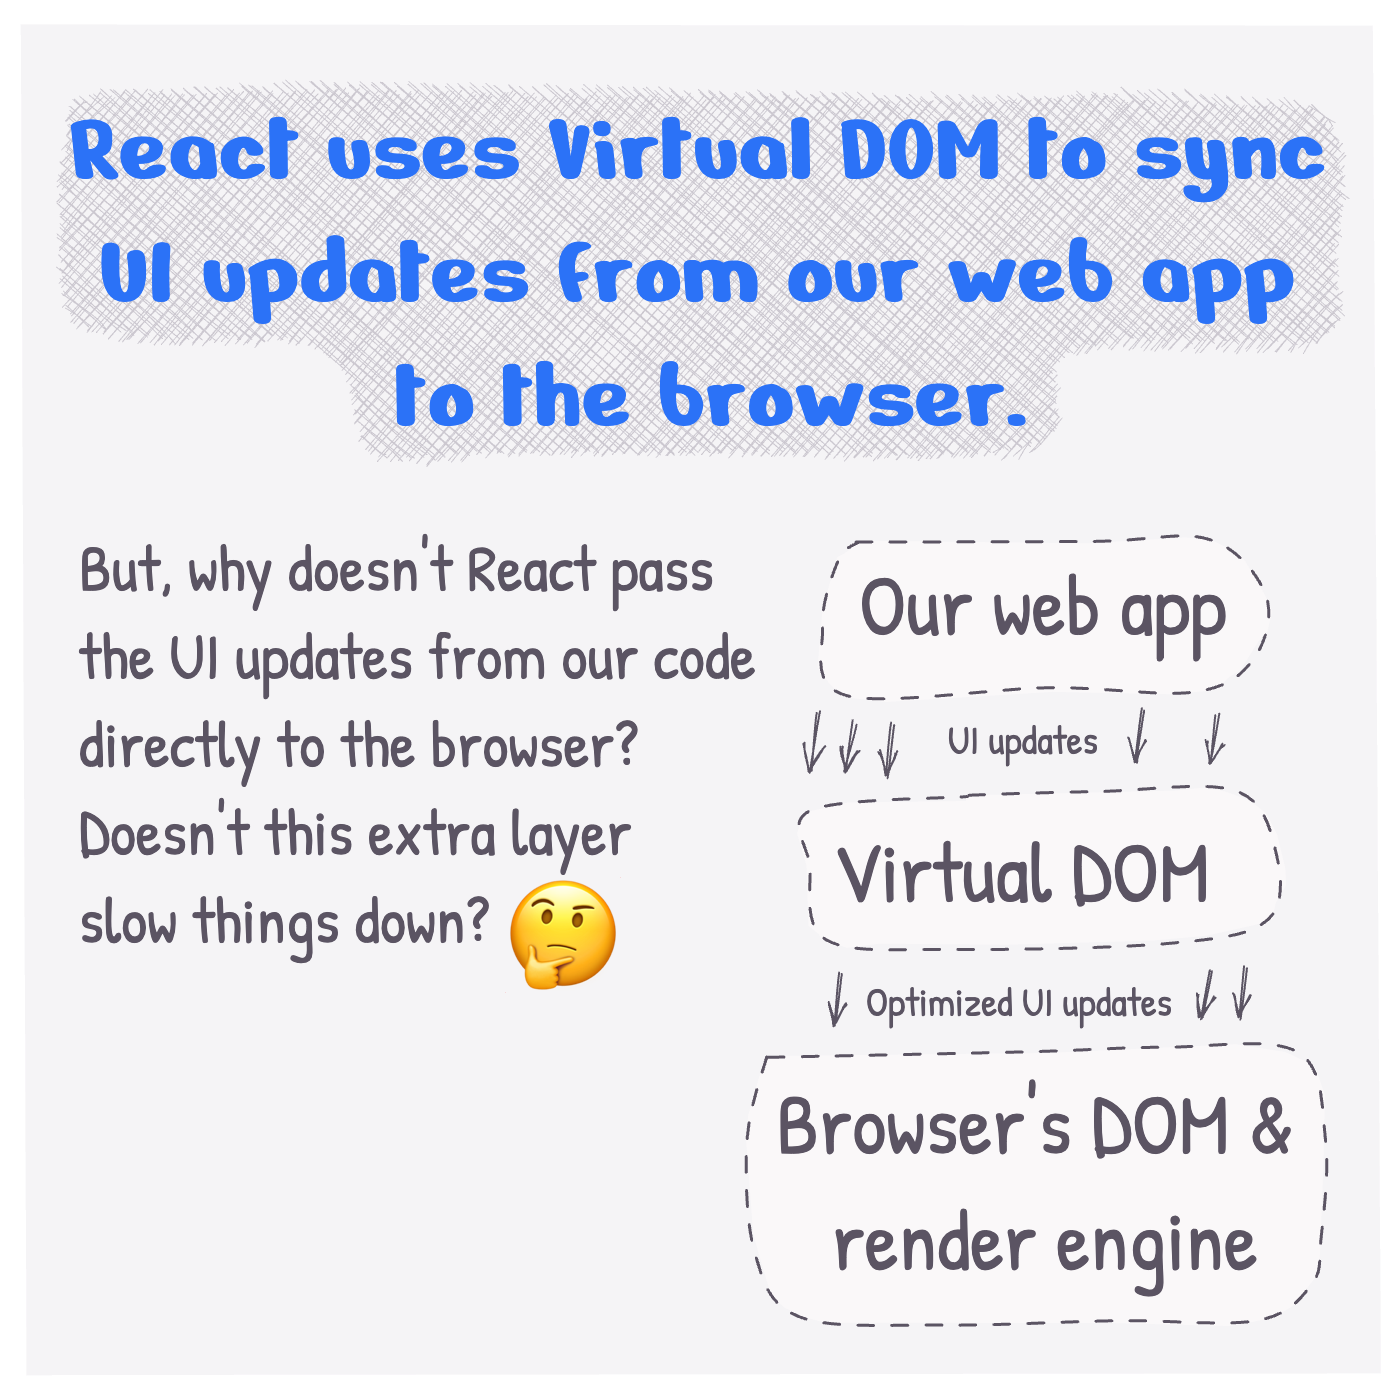 Virtual DOM is an in-memory object that React maintains to sync UI updates from web app to the browser.